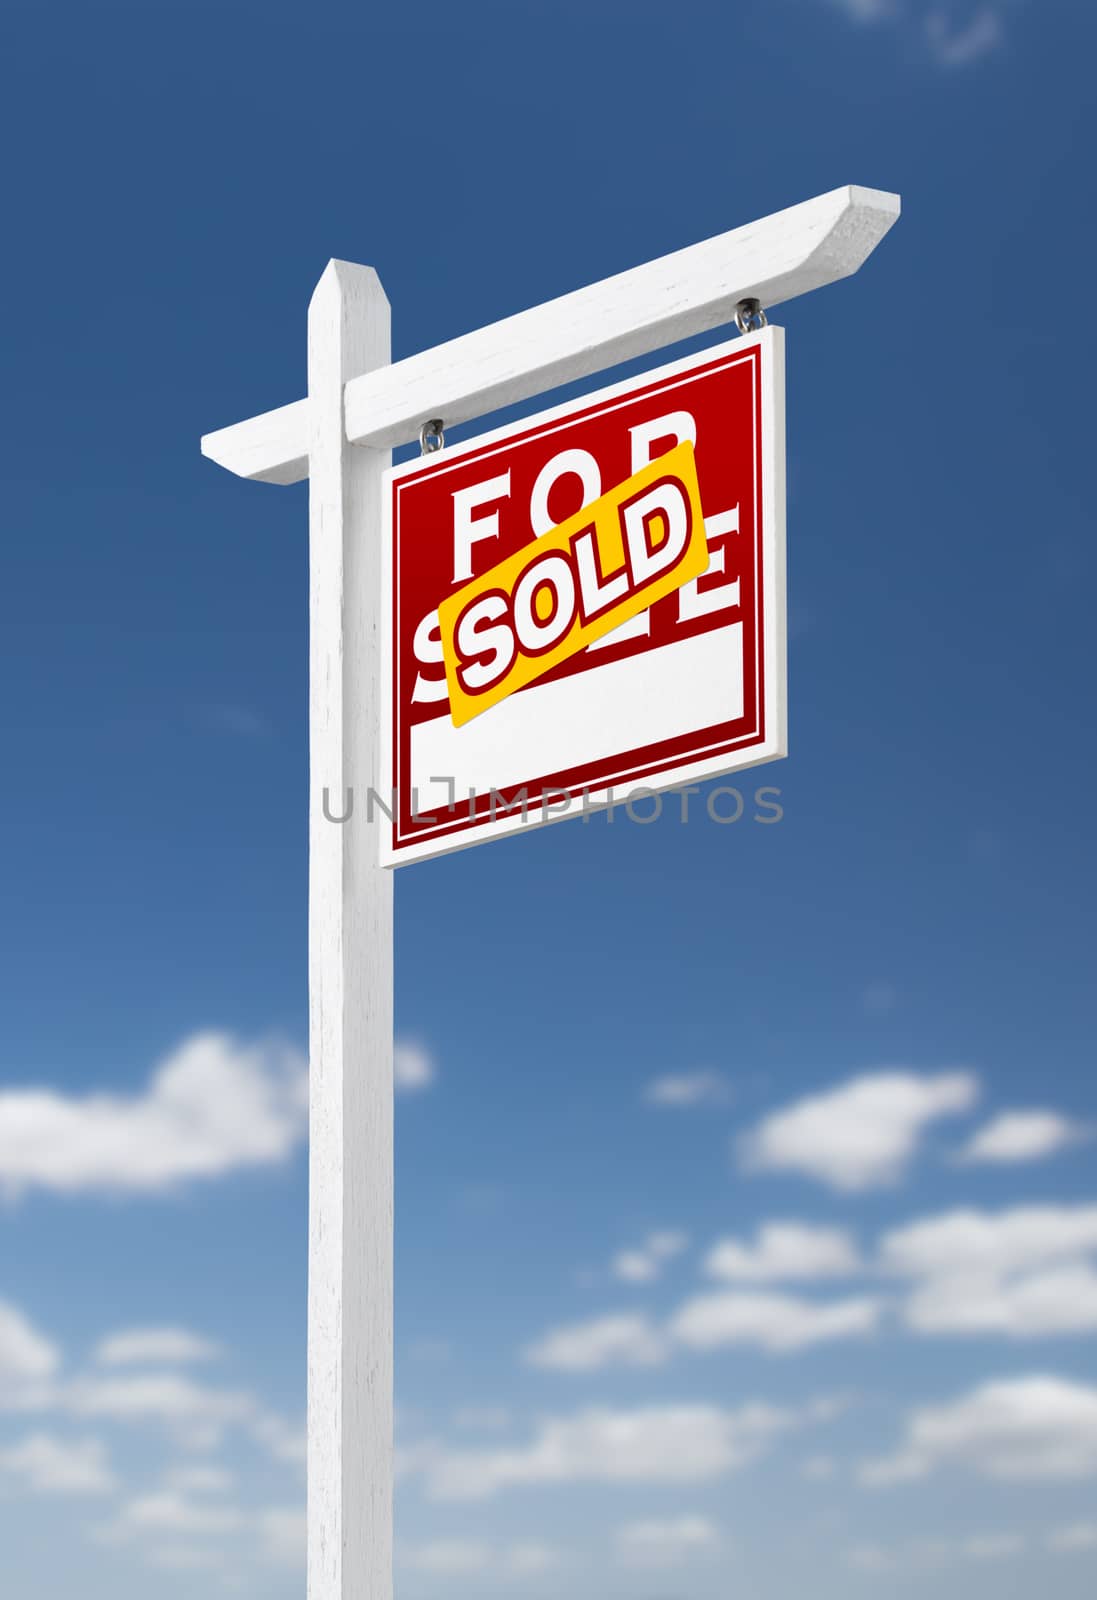 Right Facing Sold For Sale Real Estate Sign on a Blue Sky with C by Feverpitched